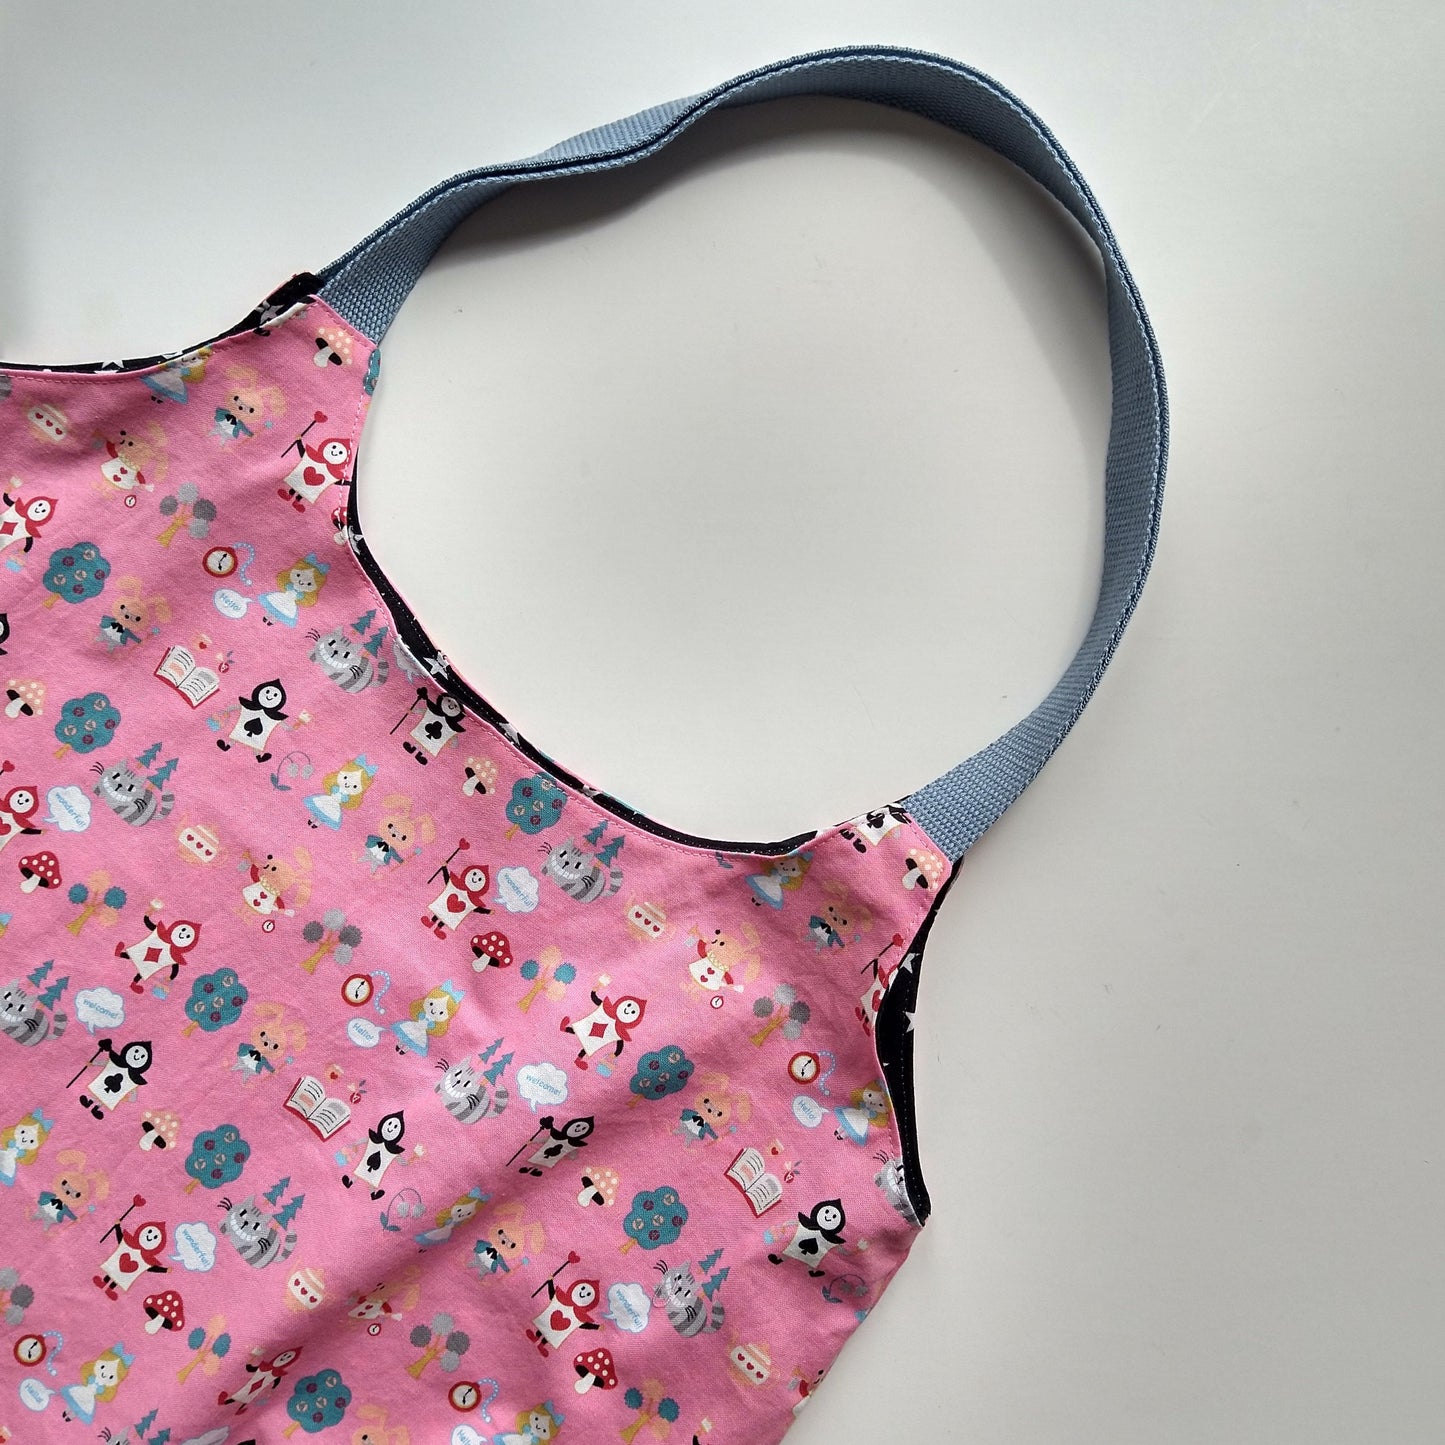 Shopping bag, reversible, size small, Alice pink (Handmade in Canada)